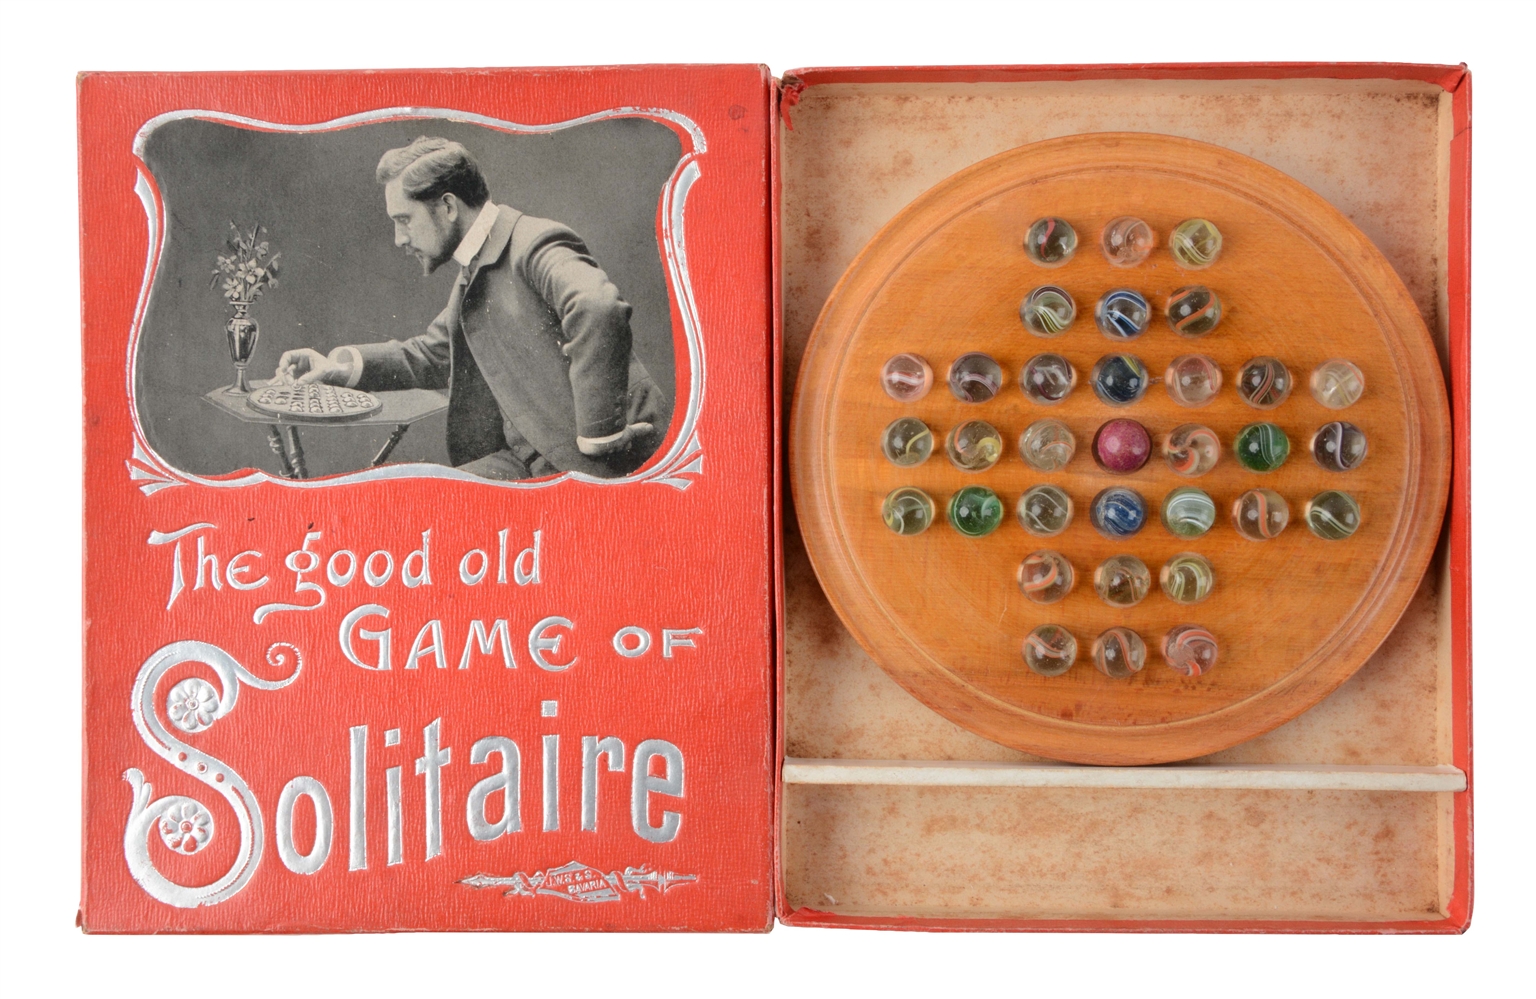 SOLITAIRE GAME BY J.W. S&S BAVARIA.